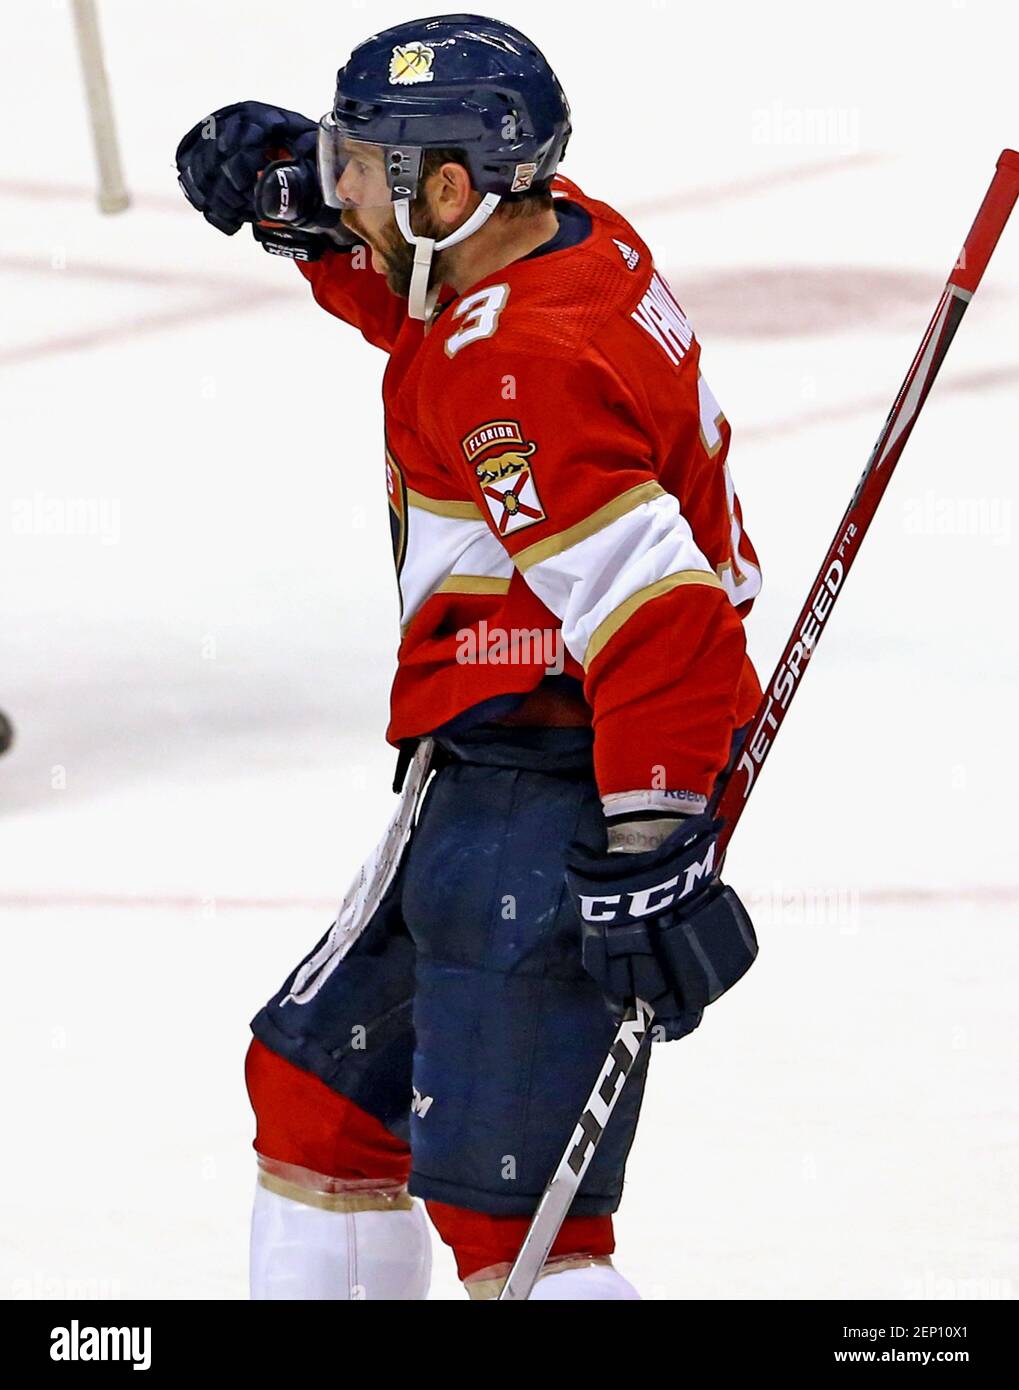 Florida Panthers defenseman Keith Yandle (3) reacts after scoring during the third period of an NHL hockey game against the Carolina Hurricanes at the BB&T Center Tuesday, Oct. 8, 2019 in Sunrise, Fla. (Photo by David Santiago/Miami Herald/TNS/Sipa USA) Stock Photo